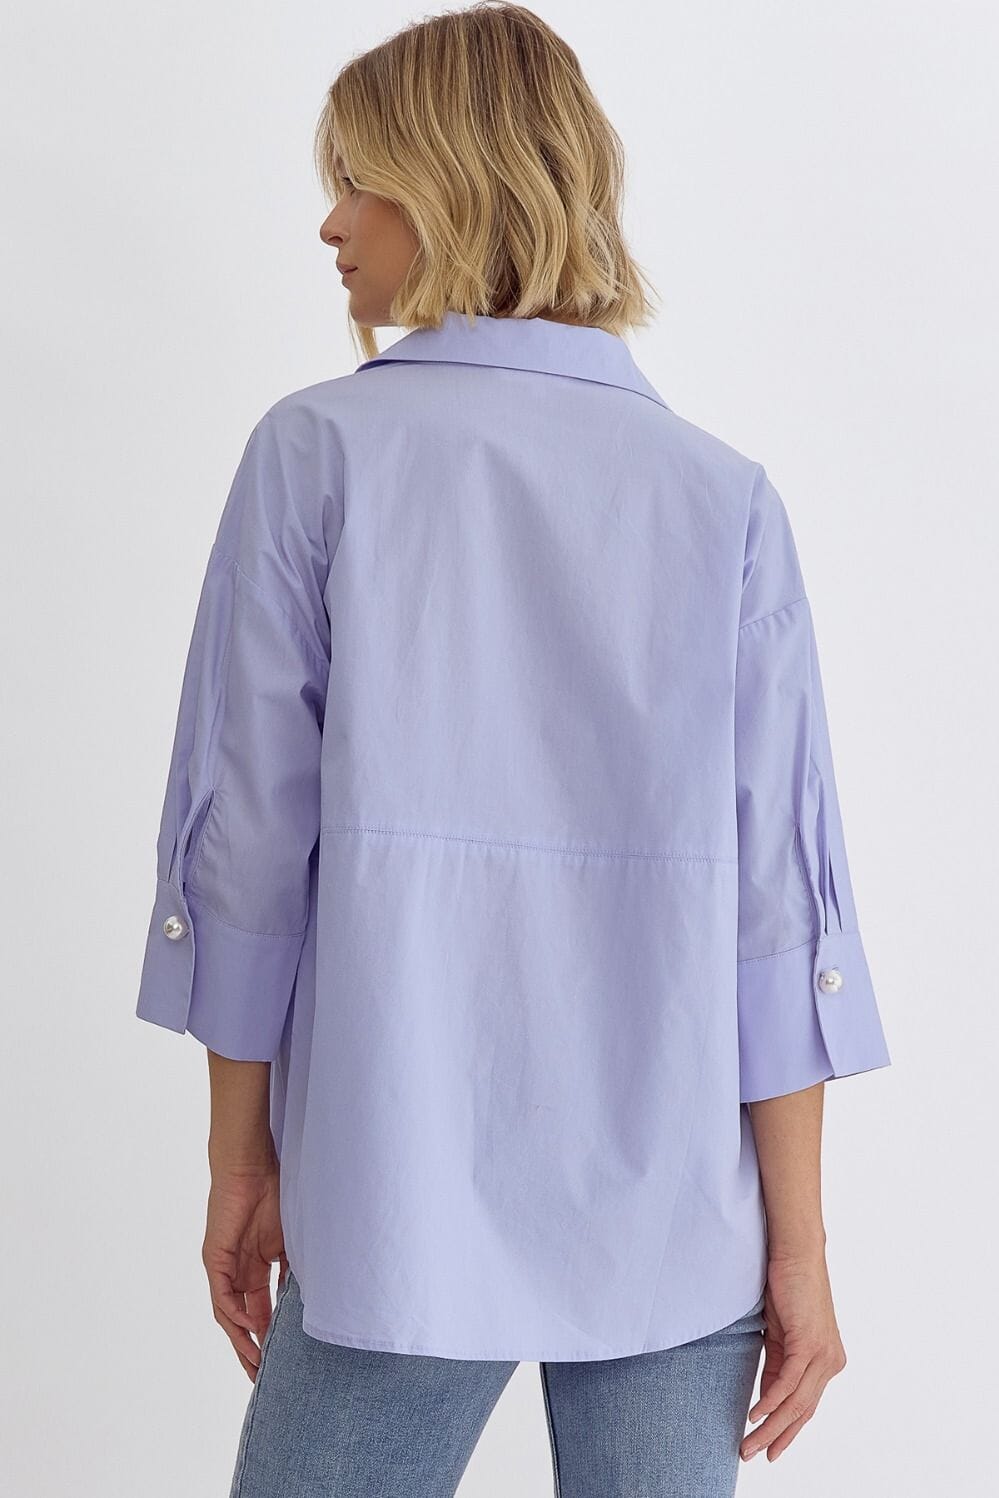 Coming Up Blue Collared Top - Caroline Hill